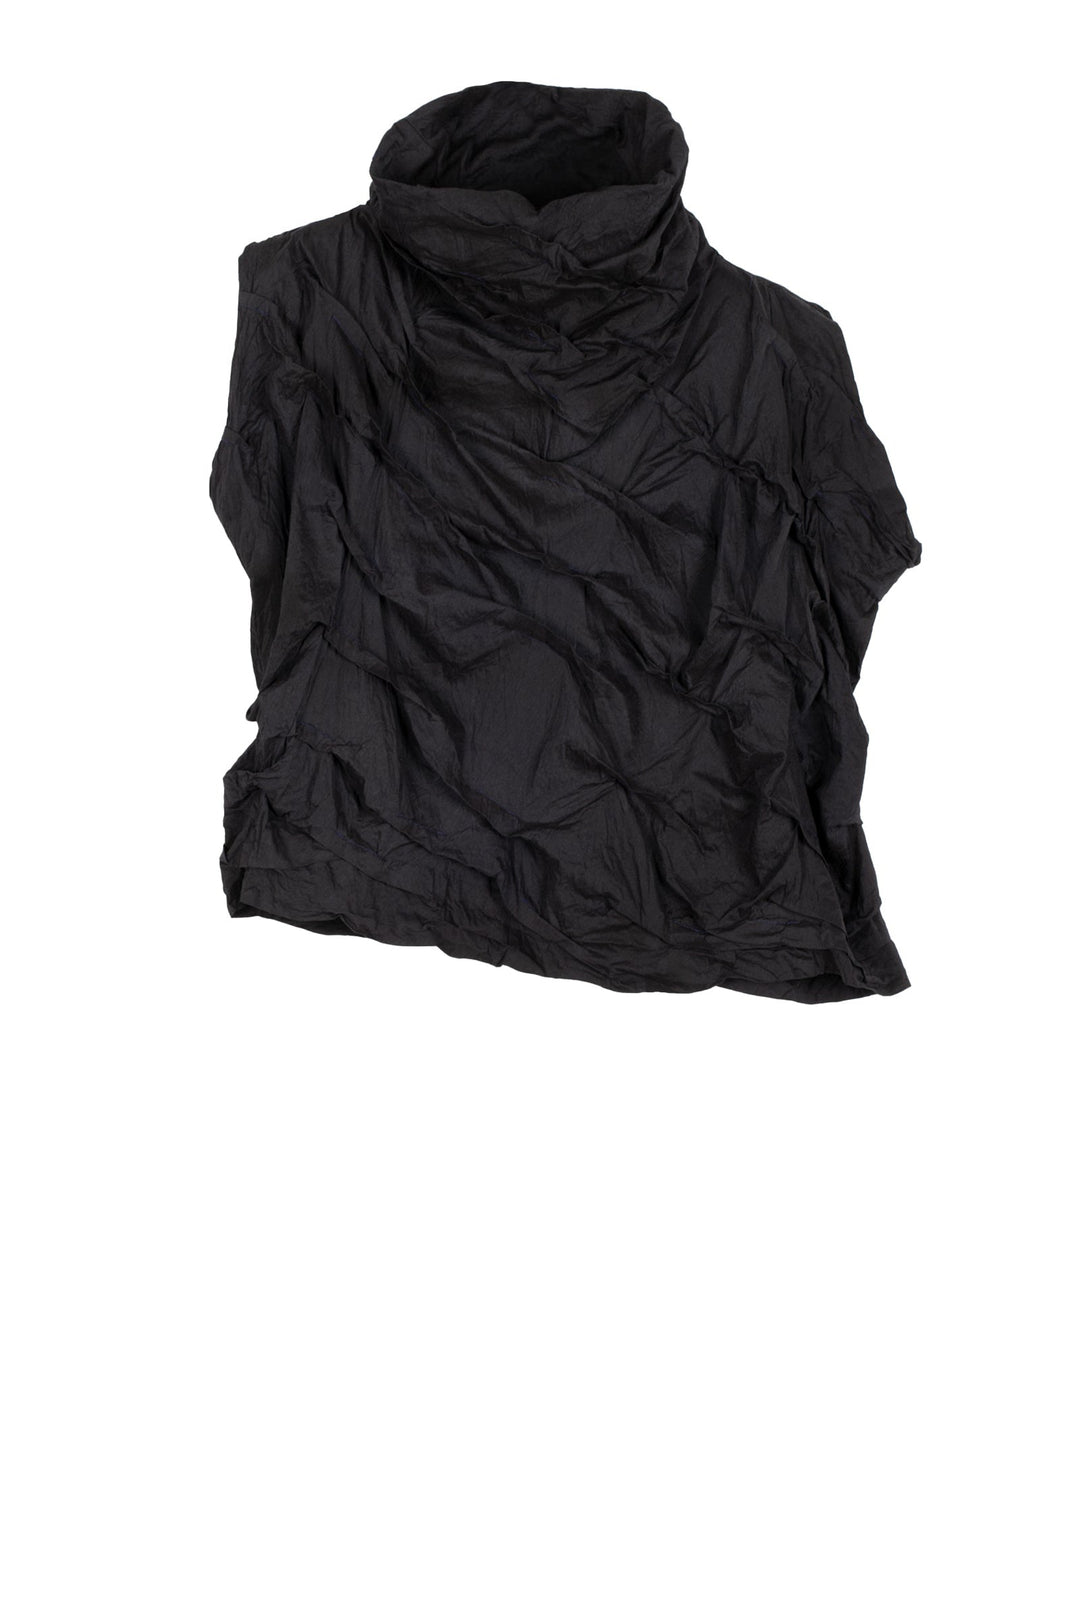 DYED COTTON SILK HEAVY VOILE WAVY TUCK SHELL TOP - dh1553-blk -